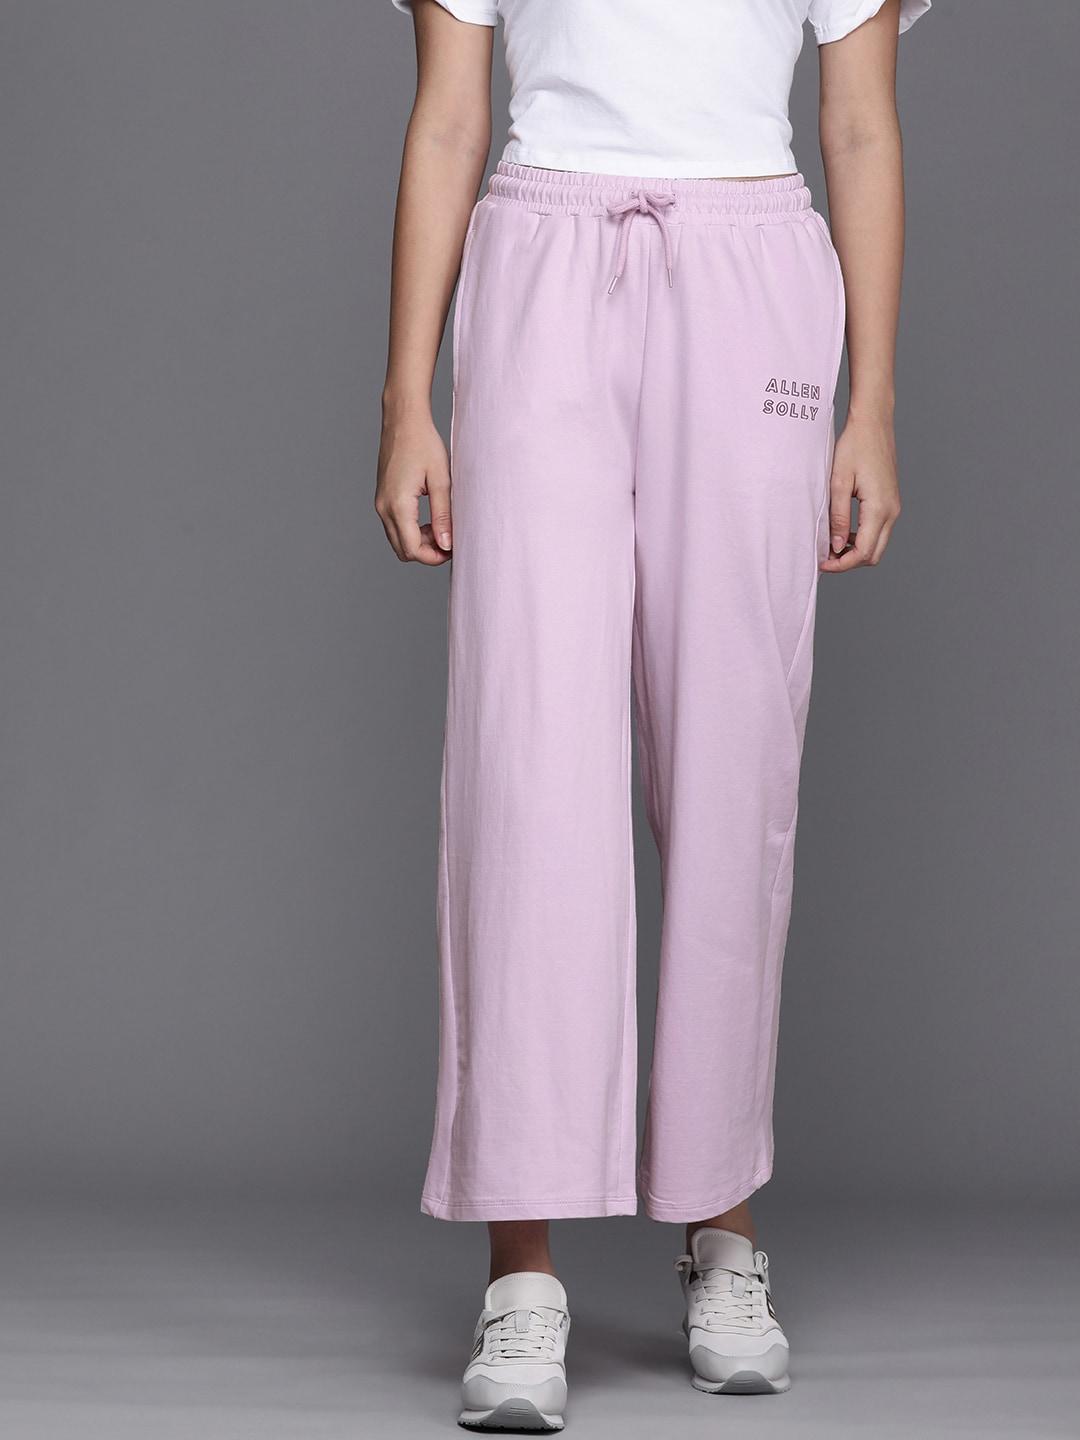 allen solly woman women lavender flared high-rise culottes trousers